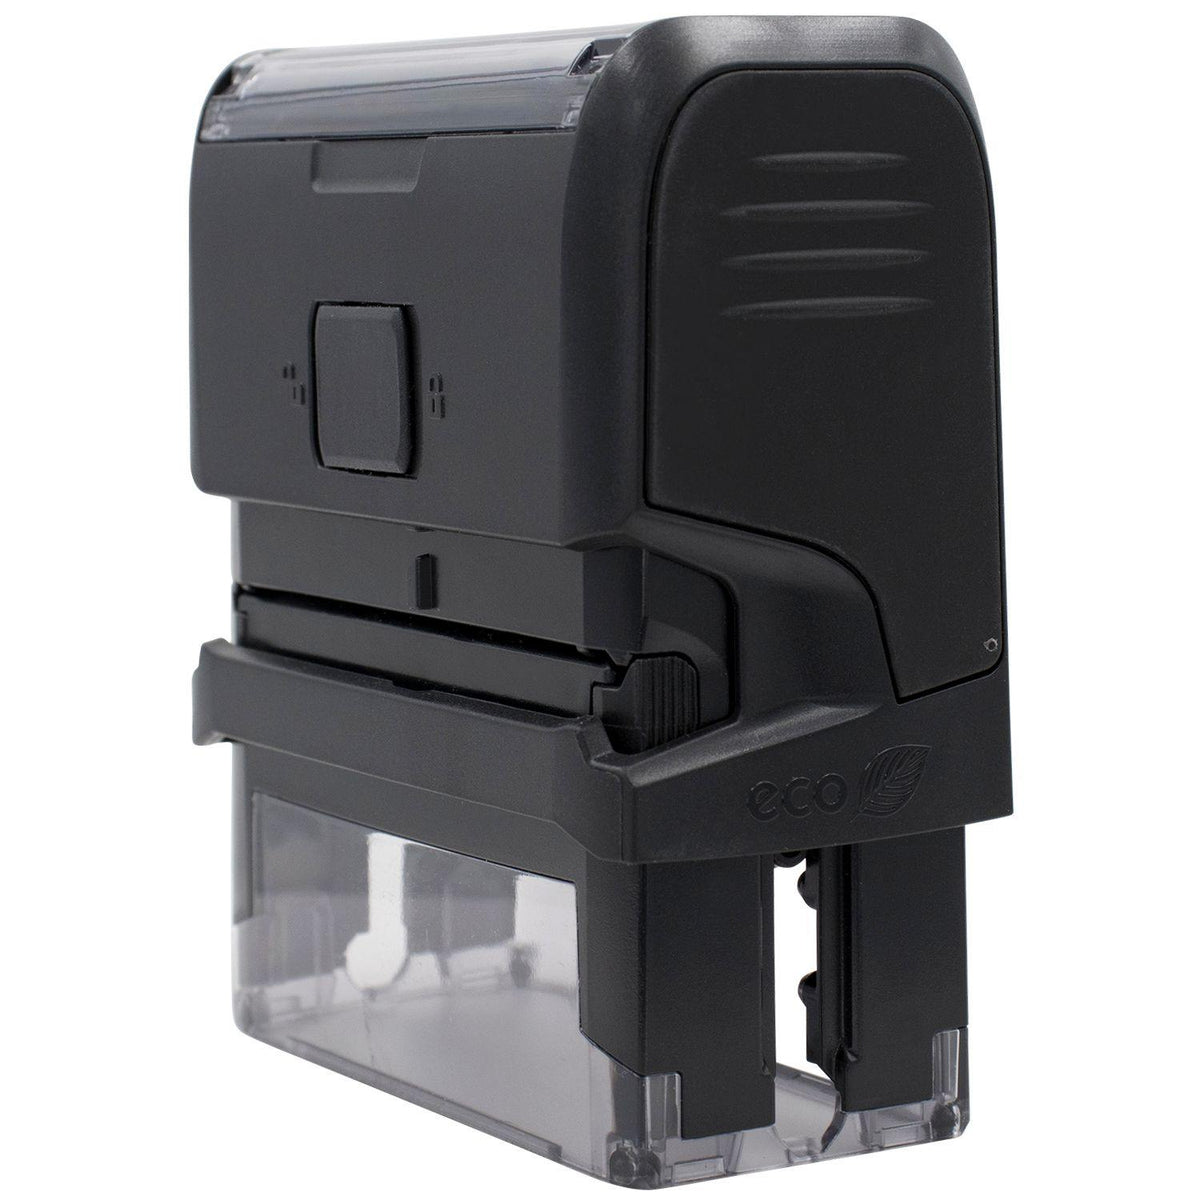 Self Inking Distributed Stamp - Engineer Seal Stamps - Brand_Trodat, Impression Size_Small, Stamp Type_Self-Inking Stamp, Type of Use_Business